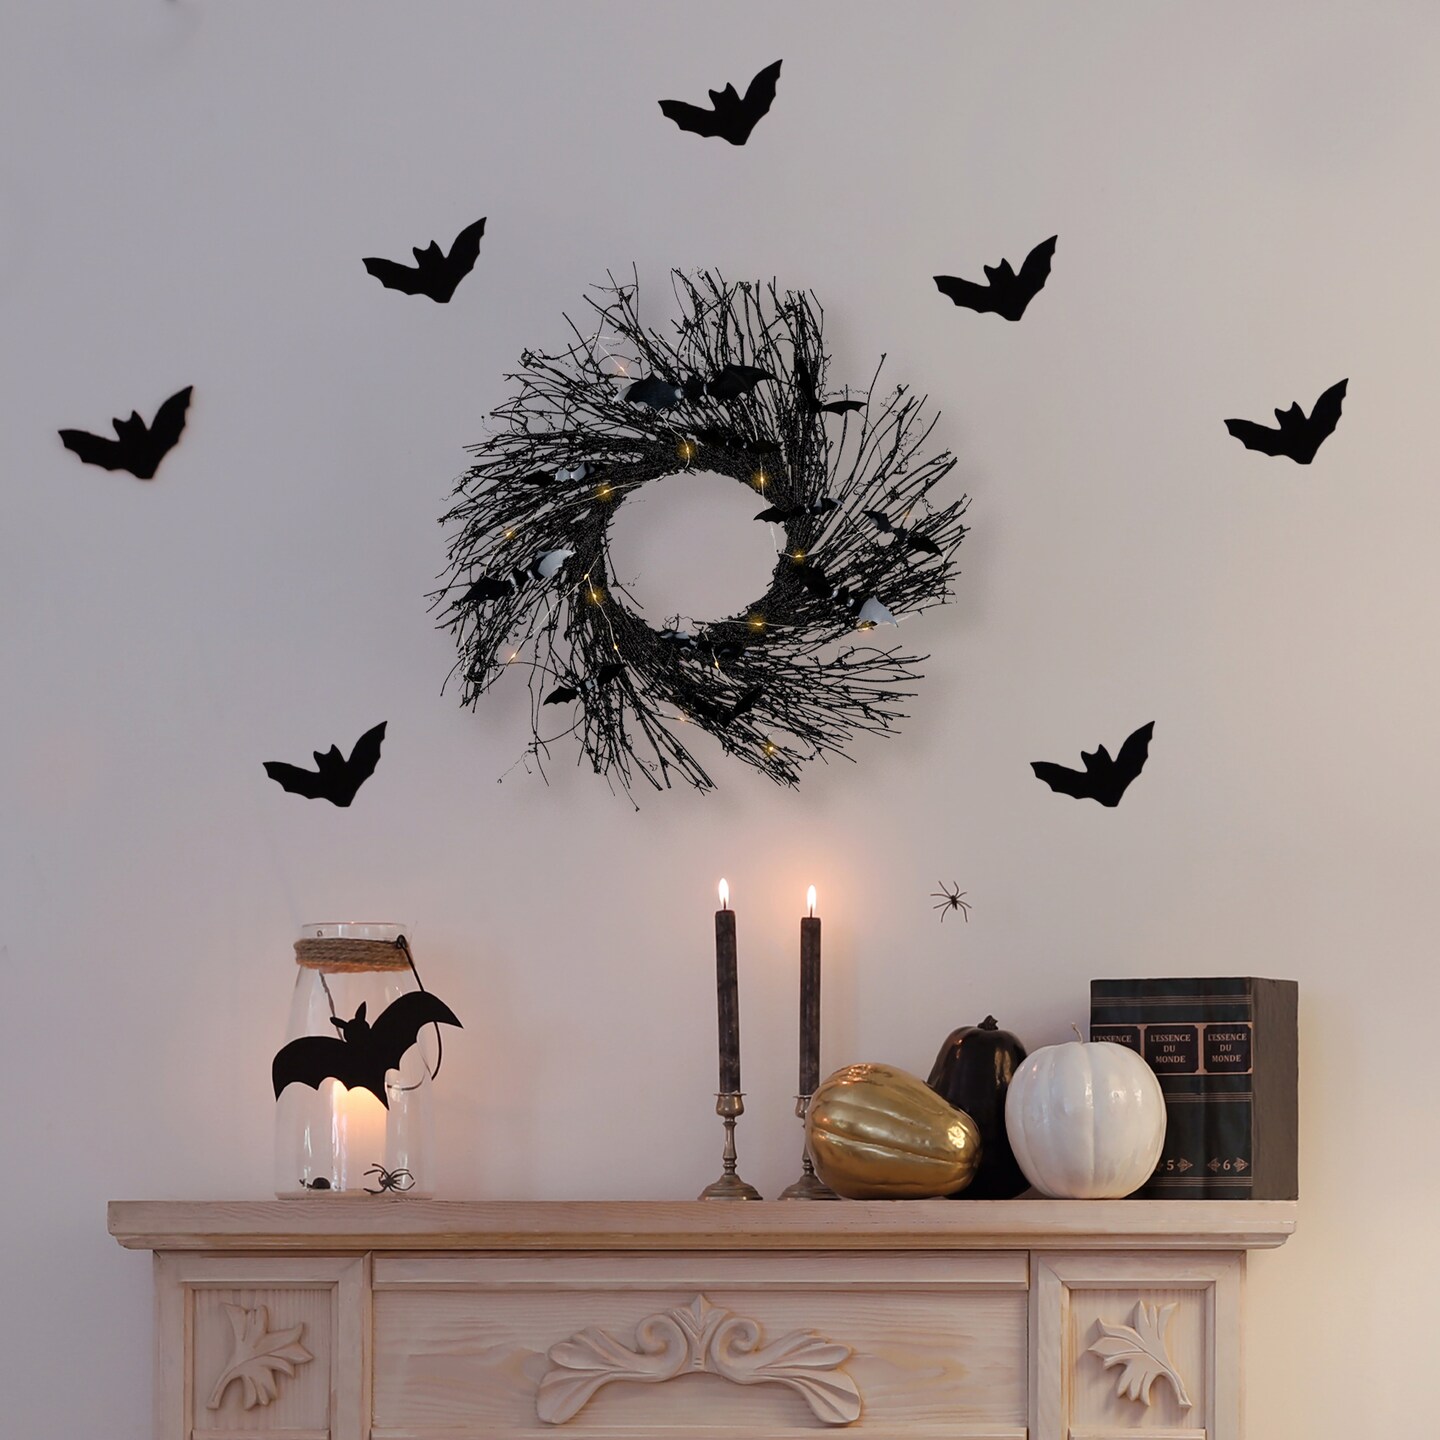 Northlight Black Halloween Twig Wreath with Bats and Warm White Lights, 22-Inch